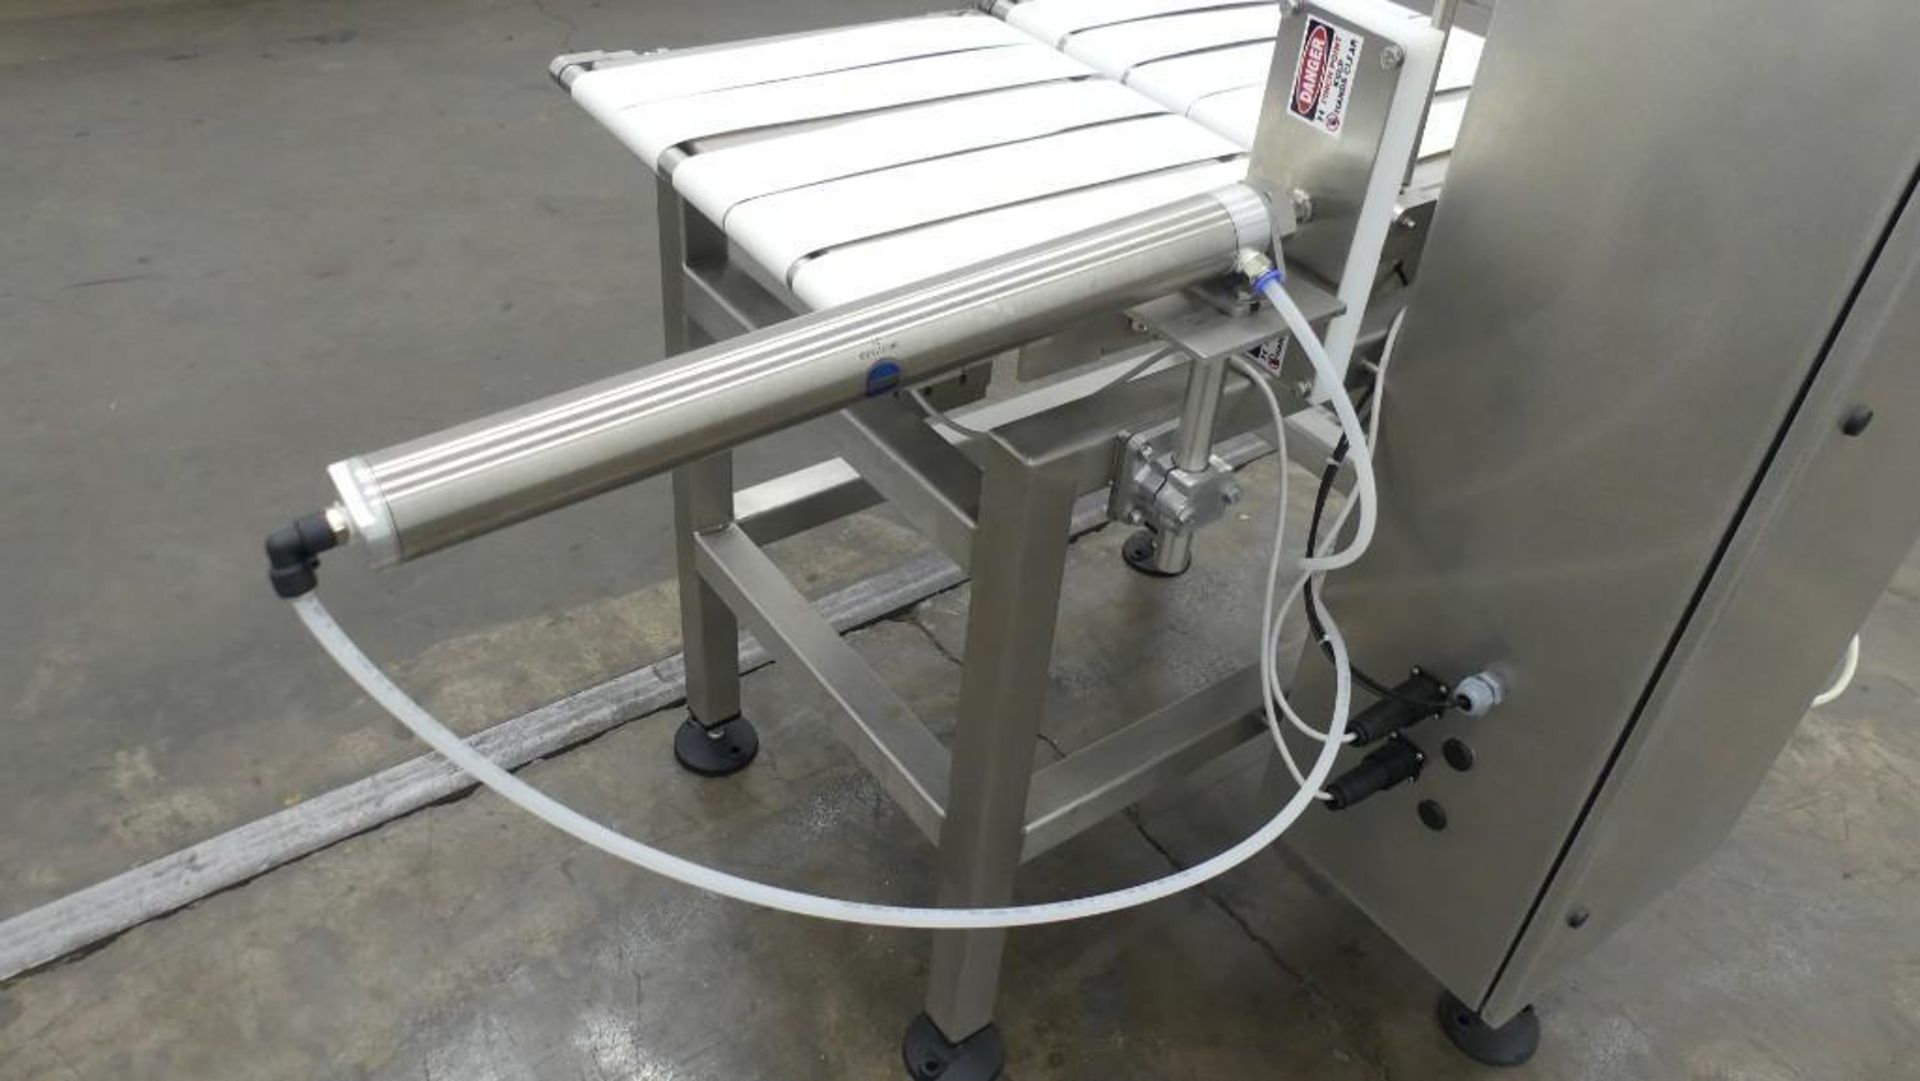 Thompson Scale Co Sonic 350 Checkweigher - Image 13 of 18